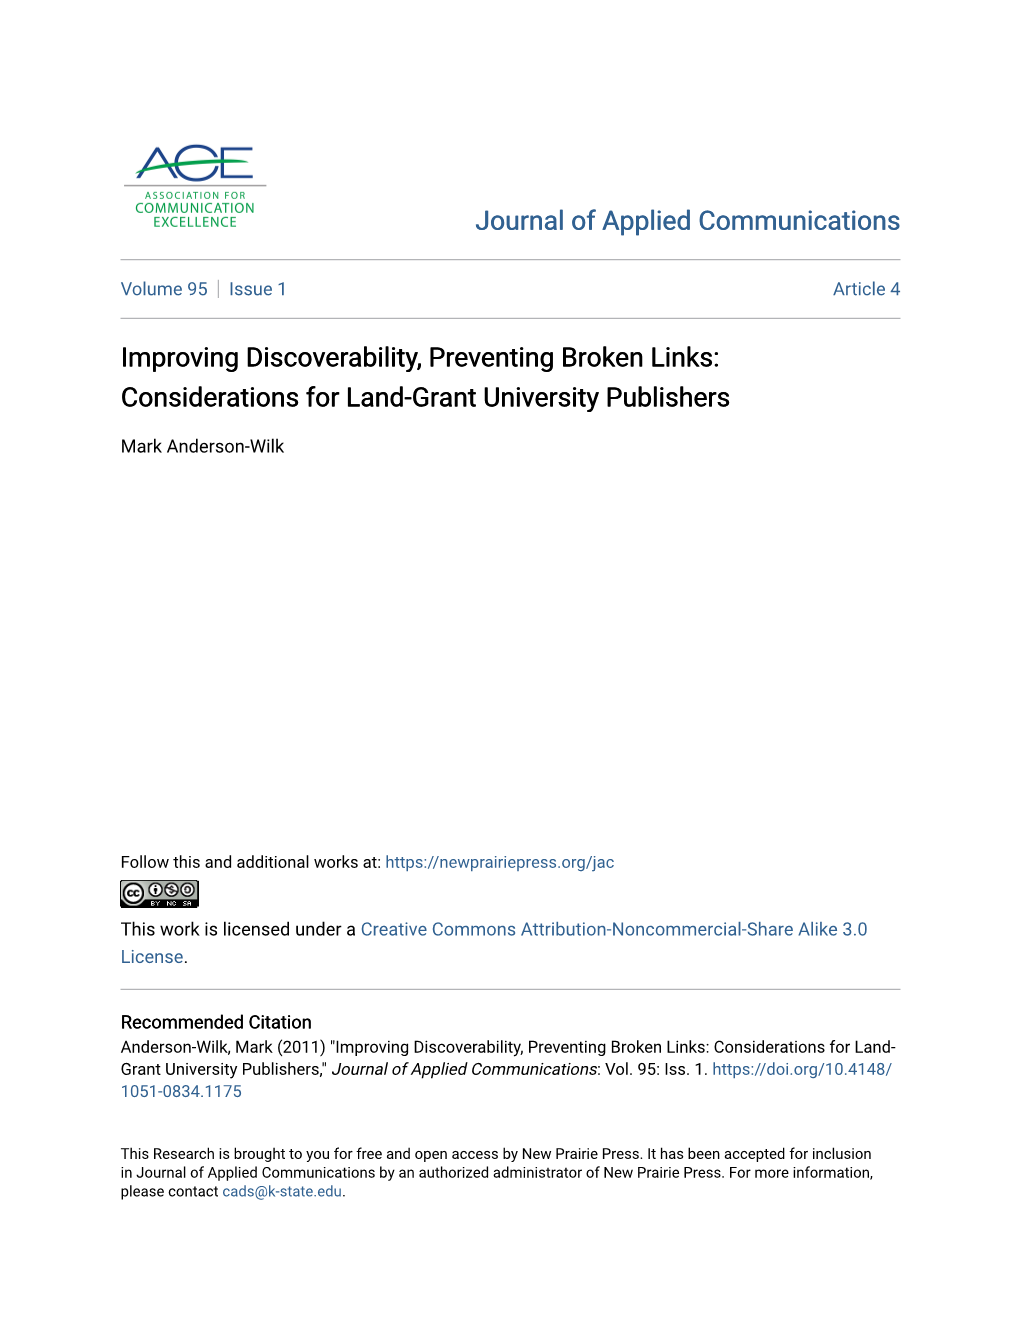 Improving Discoverability, Preventing Broken Links: Considerations for Land-Grant University Publishers